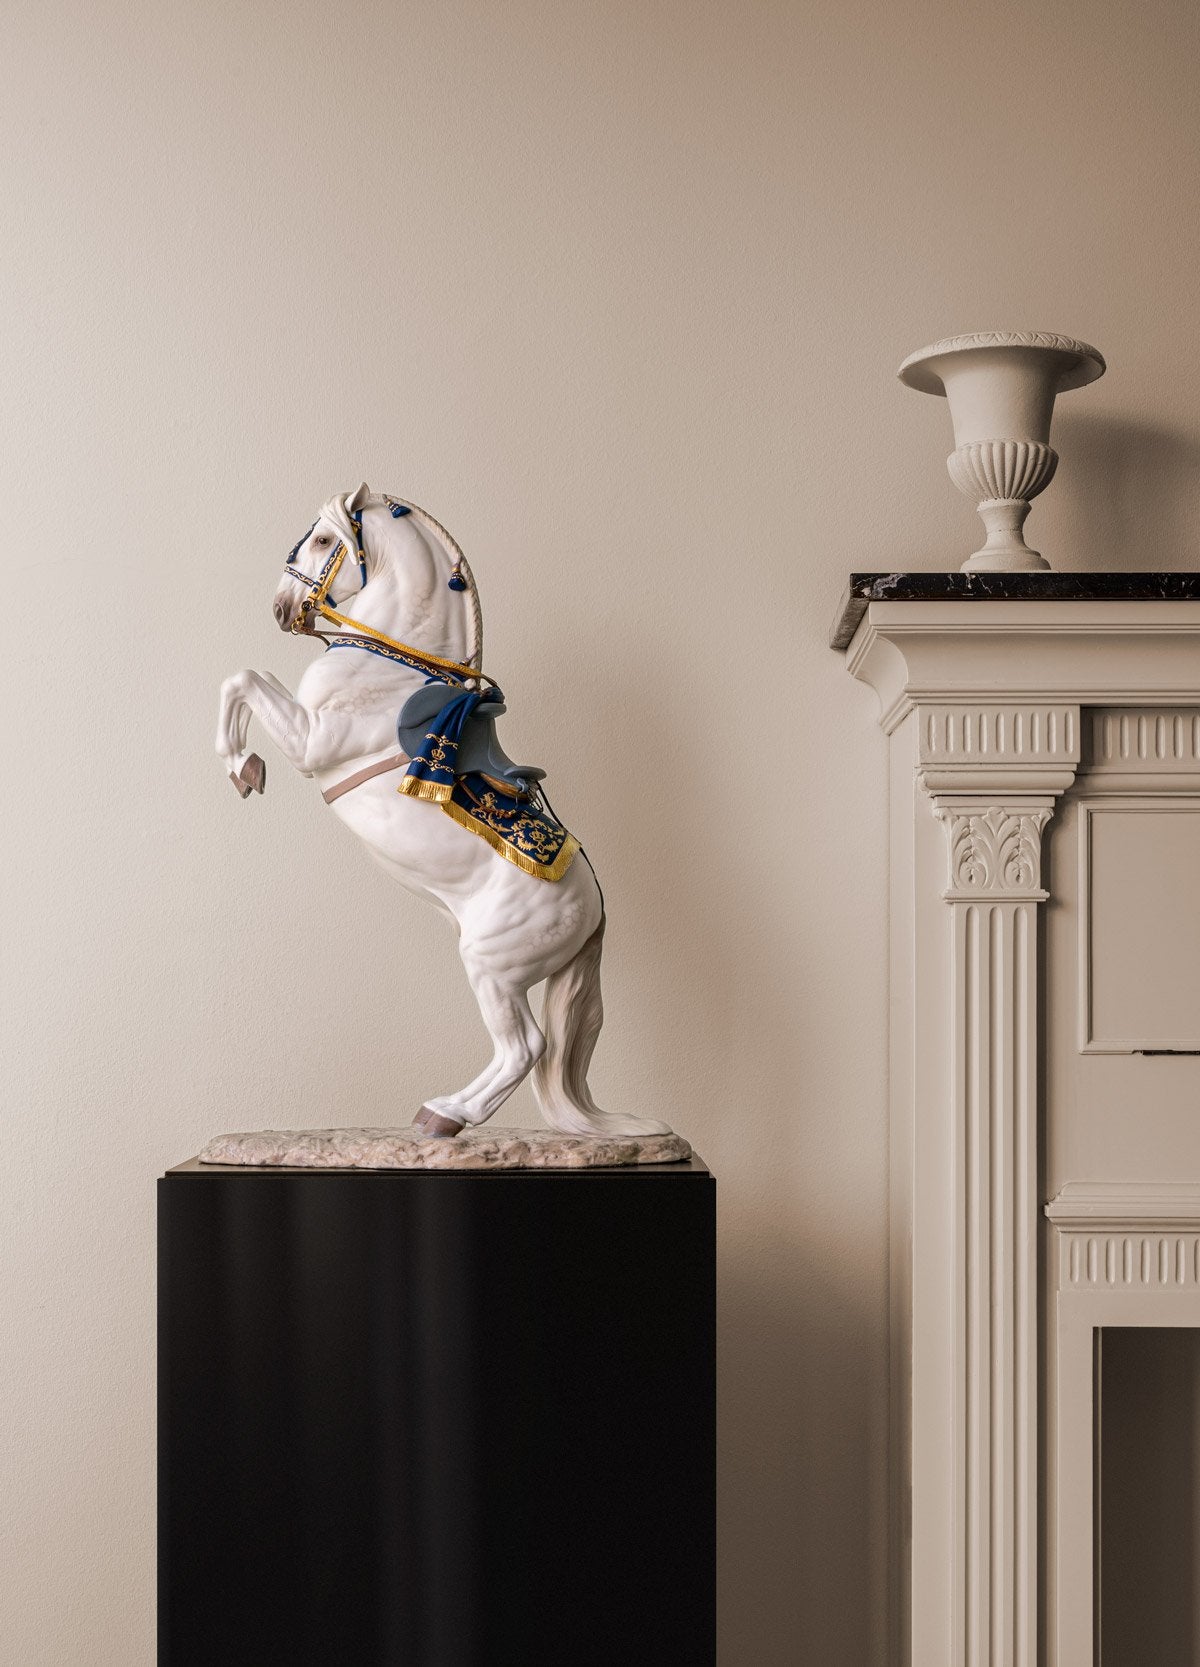 Spanish Pure Breed Horse Sculpture - Haute École, Limited Edition